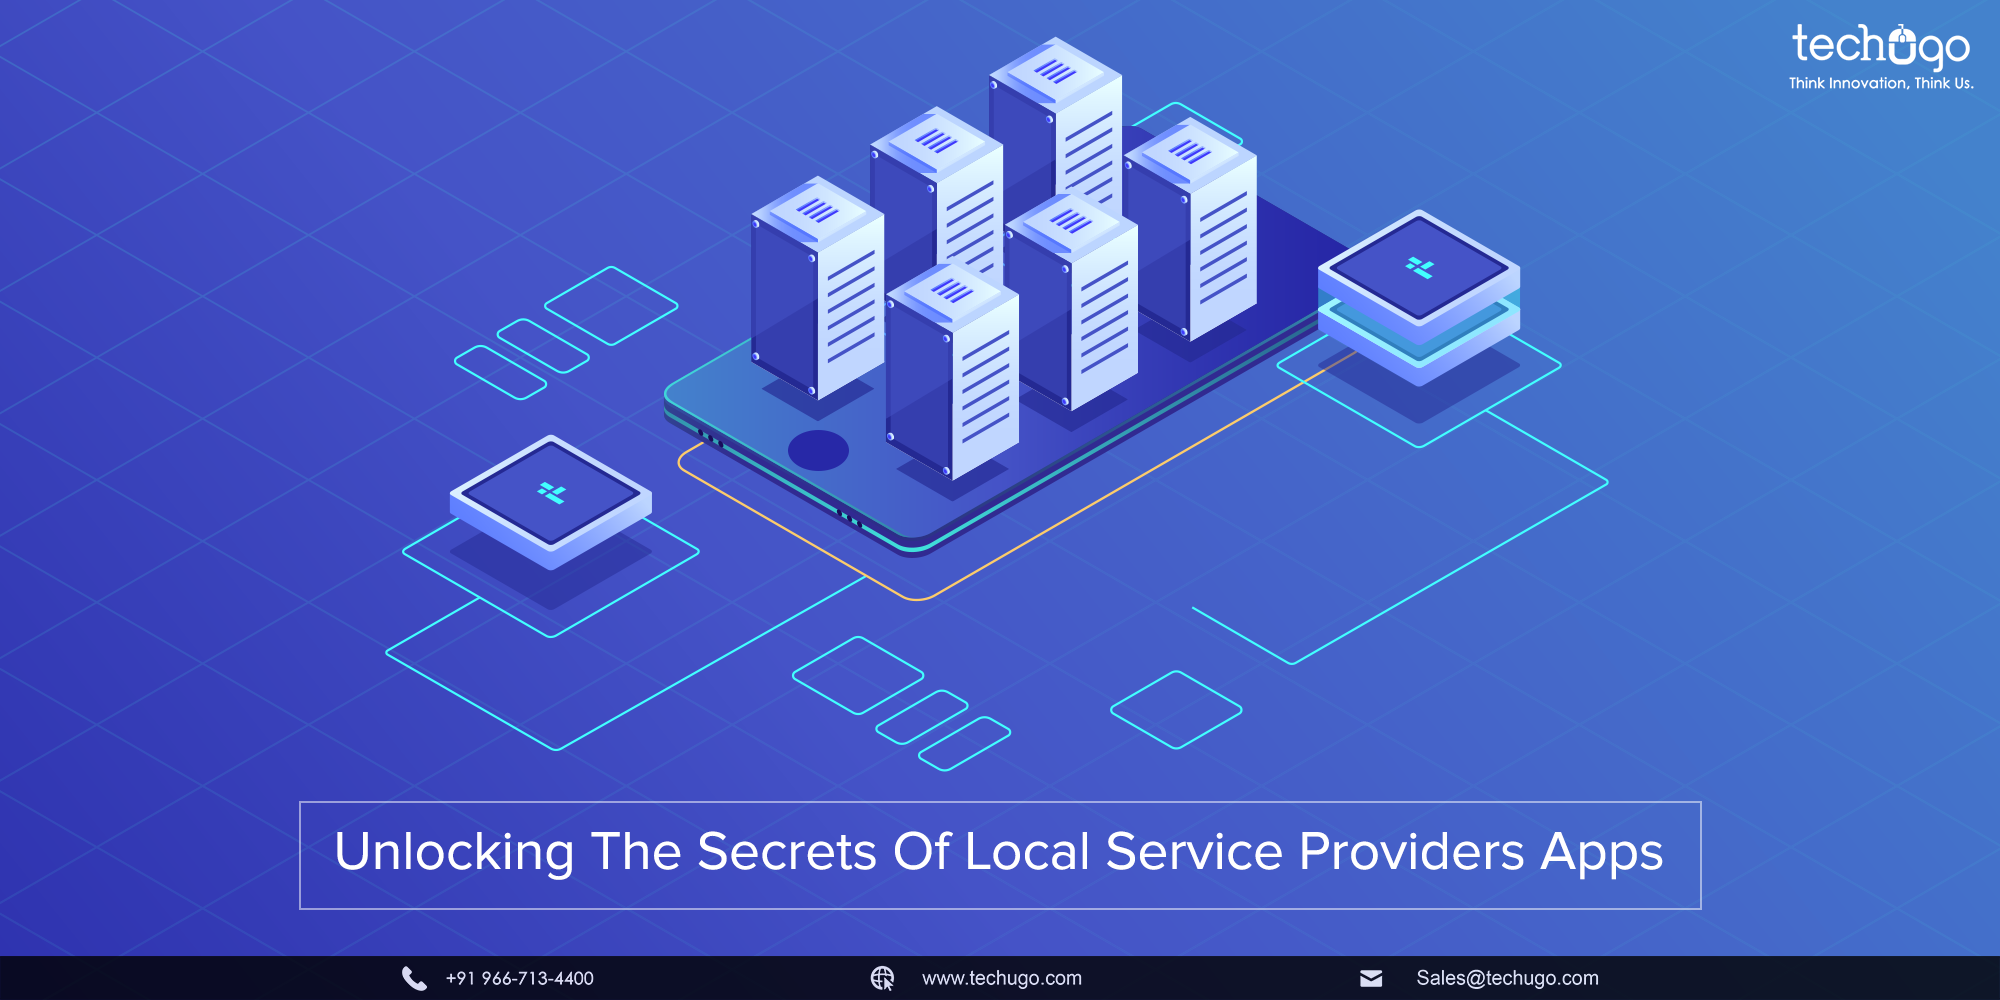 Unlocking The Secrets Of Local Service Providers Apps